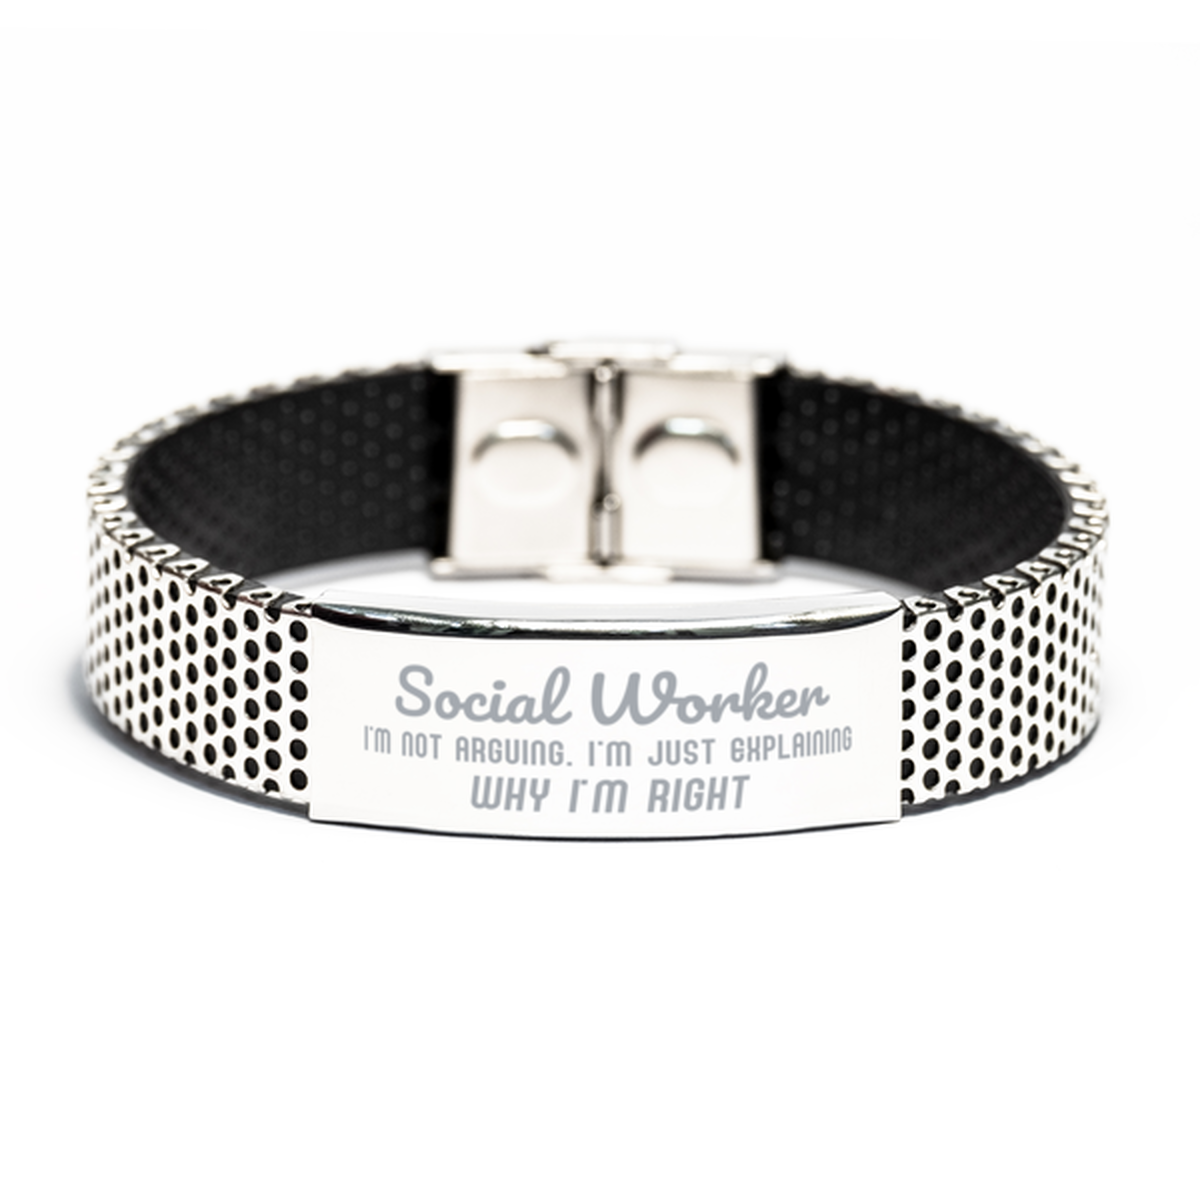 Social Worker I'm not Arguing. I'm Just Explaining Why I'm RIGHT Stainless Steel Bracelet, Funny Saying Quote Social Worker Gifts For Social Worker Graduation Birthday Christmas Gifts for Men Women Coworker